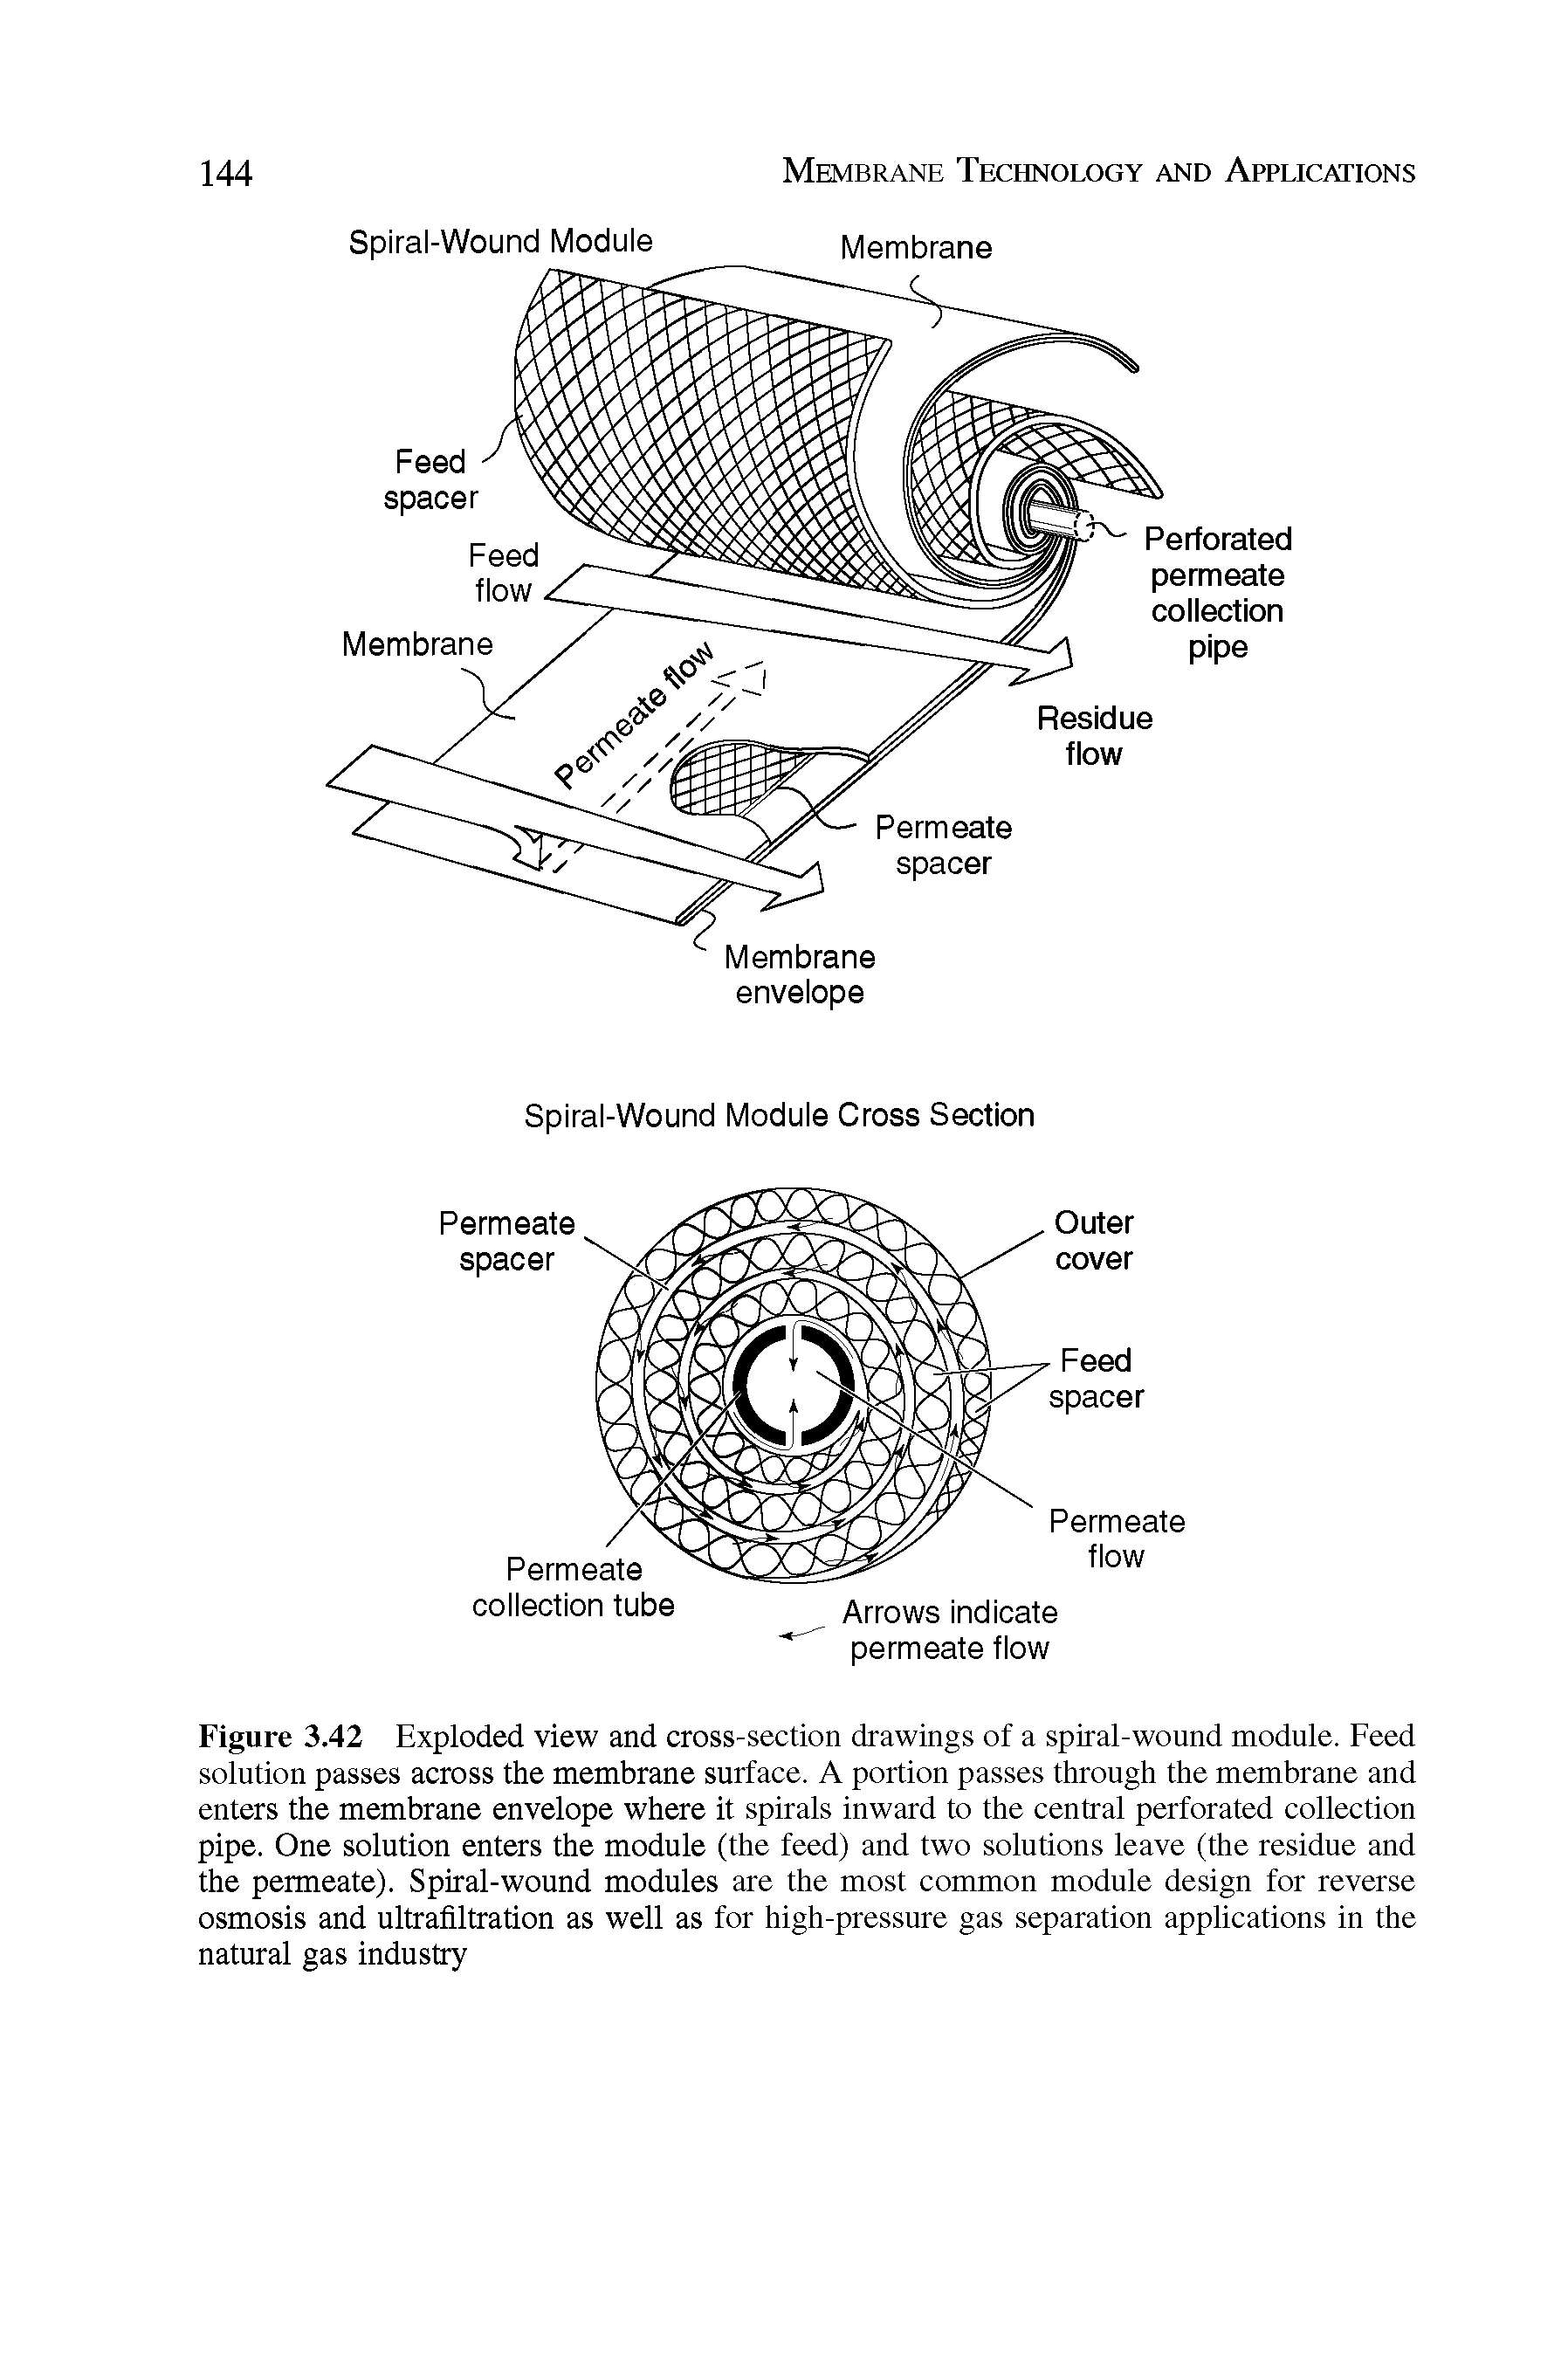 Figure 3.42 Exploded view and cross-section drawings of a spiral-wound module. Feed solution passes across the membrane surface. A portion passes through the membrane and enters the membrane envelope where it spirals inward to the central perforated collection pipe. One solution enters the module (the feed) and two solutions leave (the residue and the permeate). Spiral-wound modules are the most common module design for reverse osmosis and ultrafiltration as well as for high-pressure gas separation applications in the natural gas industry...